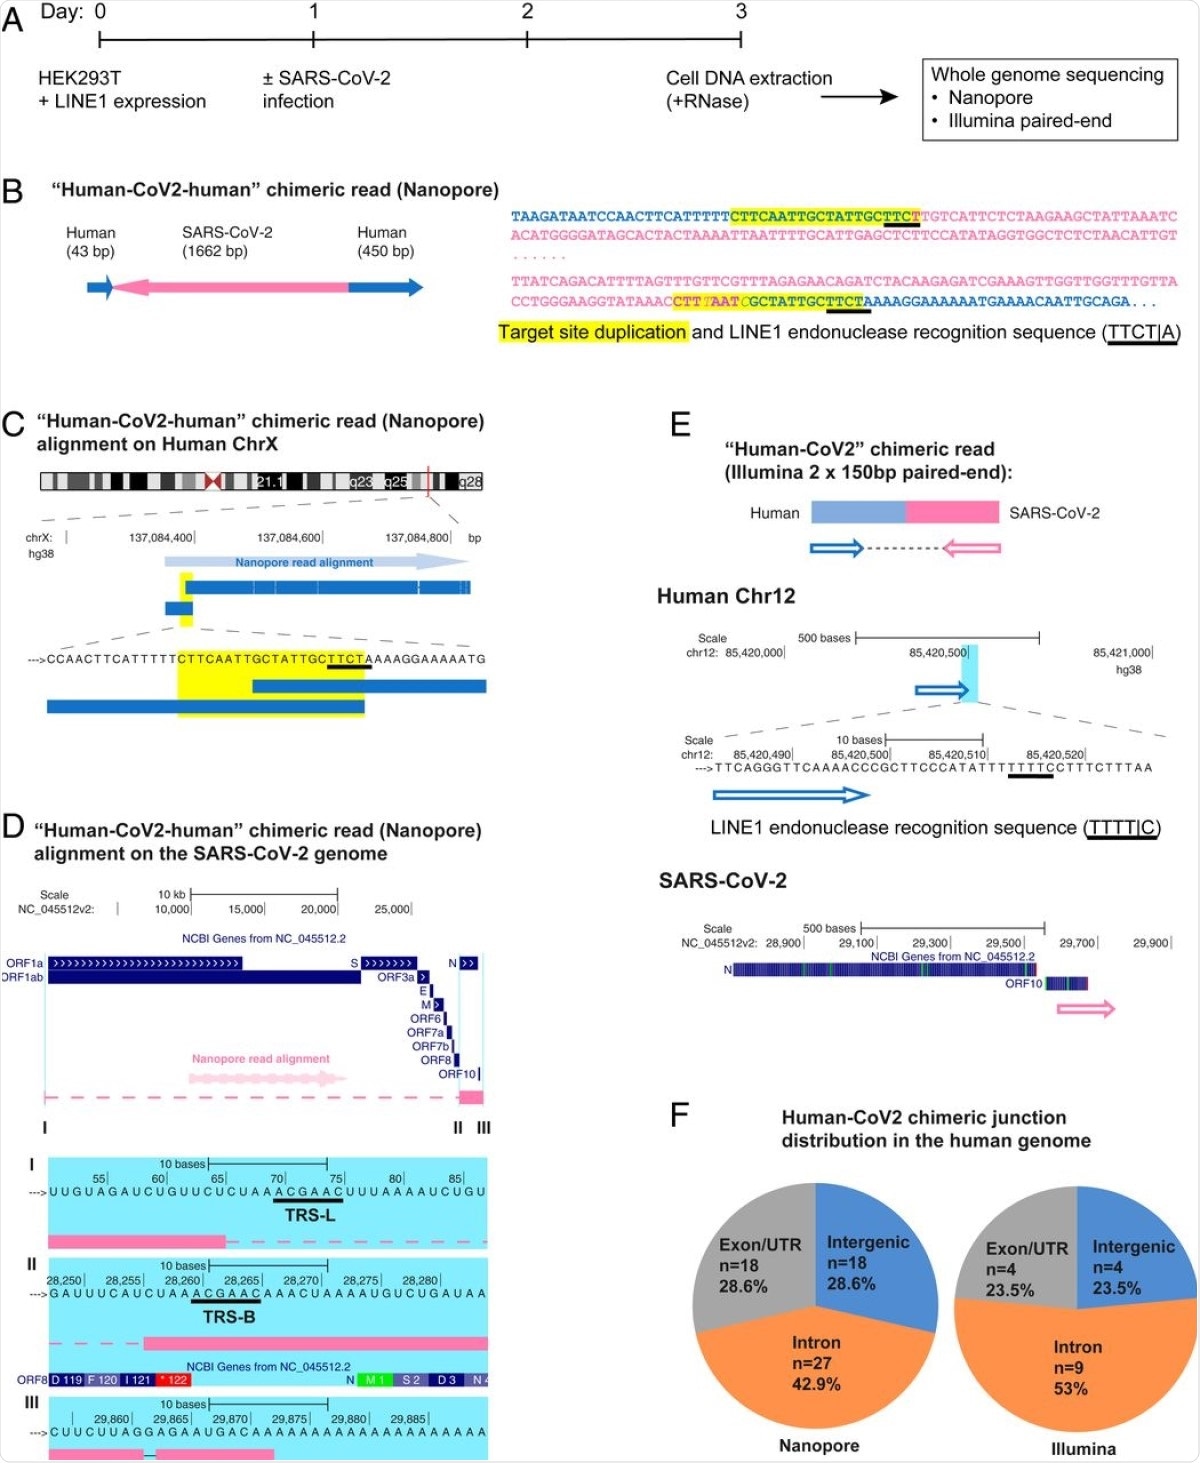 SARS-CoV-2 RNA can be reverse transcribed and integrated into the host cell genome. (A) Experimental workflow. (B) Chimeric sequence from a Nanopore sequencing read showing integration of a full-length SARS-CoV-2 NC subgenomic RNA sequence (magenta) and human genomic sequences (blue) flanking both sides of the integrated viral sequence. Features indicative of LINE1-mediated “target-primed reverse transcription” include the target site duplication (yellow highlight) and the LINE1 endonuclease recognition sequence (underlined). Sequences that could be mapped to both genomes are shown in purple with mismatches to the human genomic sequences in italics. The arrows indicate sequence orientation with regard to the human and SARS-CoV-2 genomes as shown in C and D. (C) Alignment of the Nanopore read in B with the human genome (chromosome X) showing the integration site. The human sequences at the junction region show the target site, which was duplicated when the SARS-CoV-2 cDNA was integrated (yellow highlight) and the LINE1 endonuclease recognition sequence (underlined). (D) Alignment of the Nanopore read in B with the SARS-CoV-2 genome showing the integrated viral DNA is a copy of the full-length NC subgenomic RNA. The light blue highlighted regions are enlarged to show TRS-L (I) and TRS-B (II) sequences (underlined, these are the sequences where the viral polymerase jumps to generate the subgenomic RNA) and the end of the viral sequence at the poly(A) tail (III). These viral sequence features (I–III) show that a DNA copy of the full-length NC subgenomic RNA was retro-integrated. (E) A human–viral chimeric read pair from Illumina paired-end whole-genome sequencing. The read pair is shown with alignment to the human (blue) and SARS-CoV-2 (magenta) genomes. The arrows indicate the read orientations relative to the human and SARS-CoV-2 genomes. The highlighted (light blue) region of the human read mapping is enlarged to show the LINE1 recognition sequence (underlined). (F) Distributions of human–CoV2 chimeric junctions from Nanopore (Left) and Illumina (Right) sequencing with regard to features of the human genome.